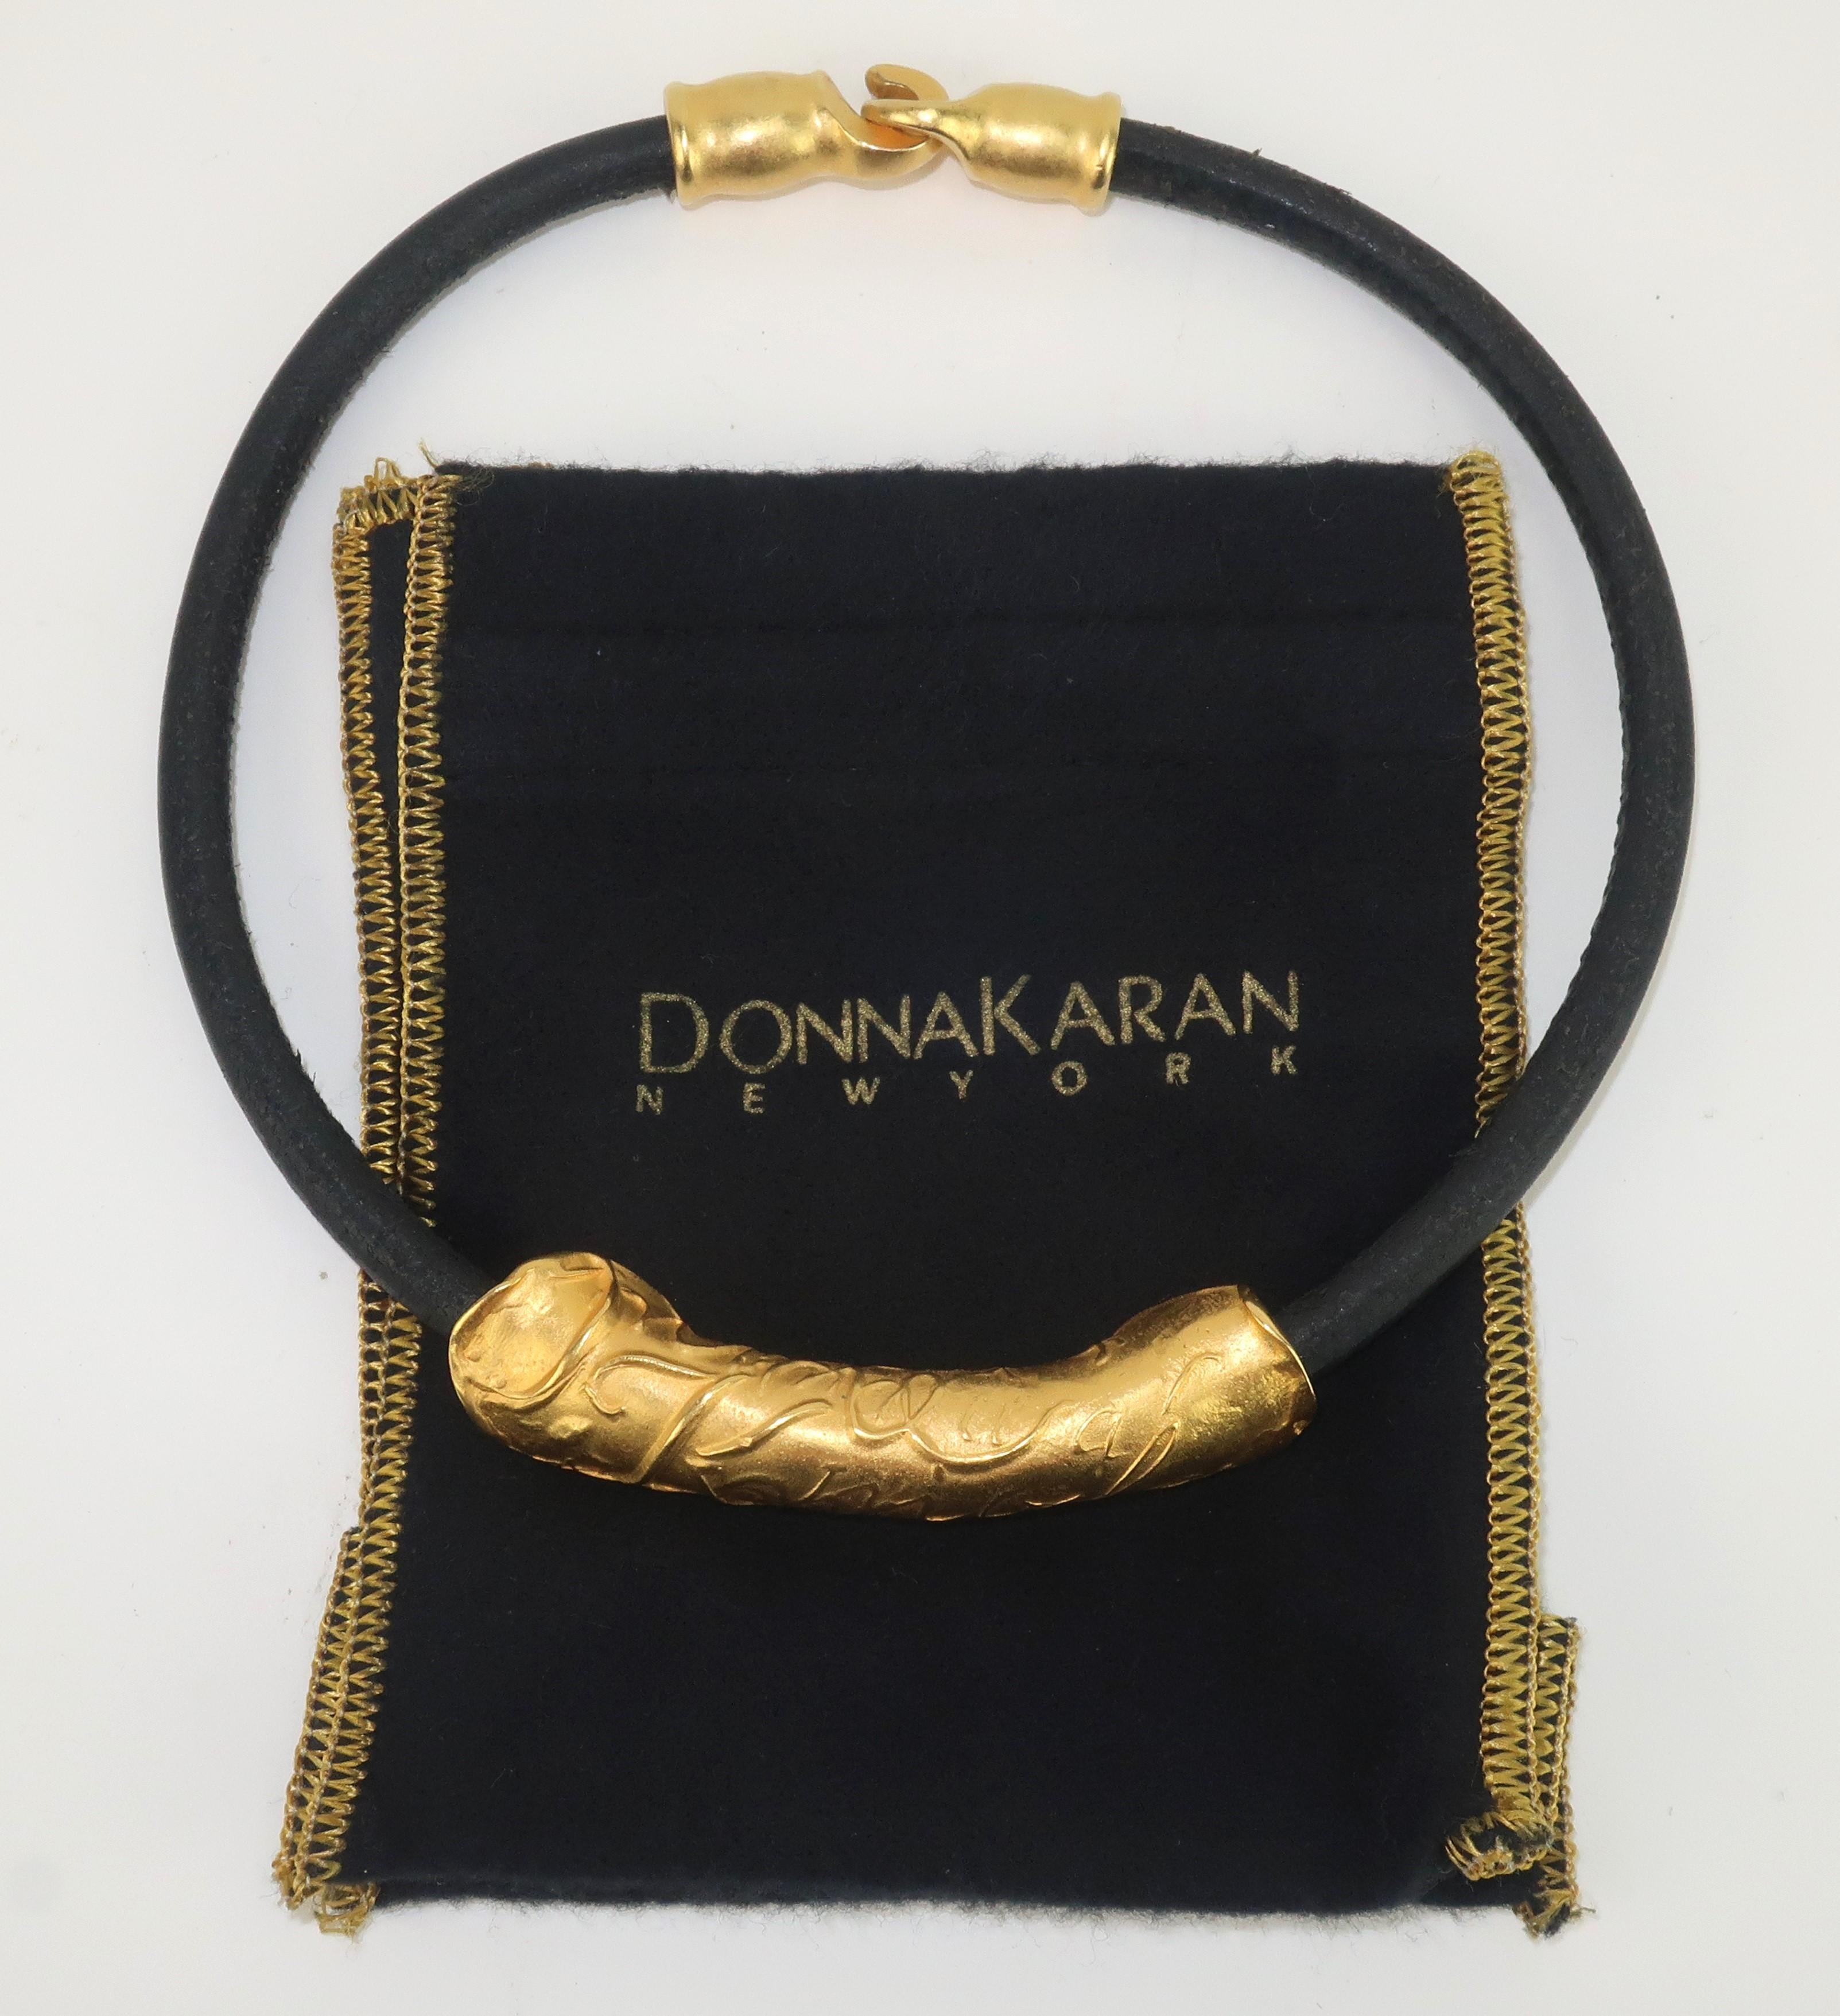 Donna Karan once described her fashion label as 'modern clothes for modern people' and this simple gilt metal and leather choker necklace is the perfect accessory for a modernist look.  A close look at the gilt metal pendant reveals a scattering of